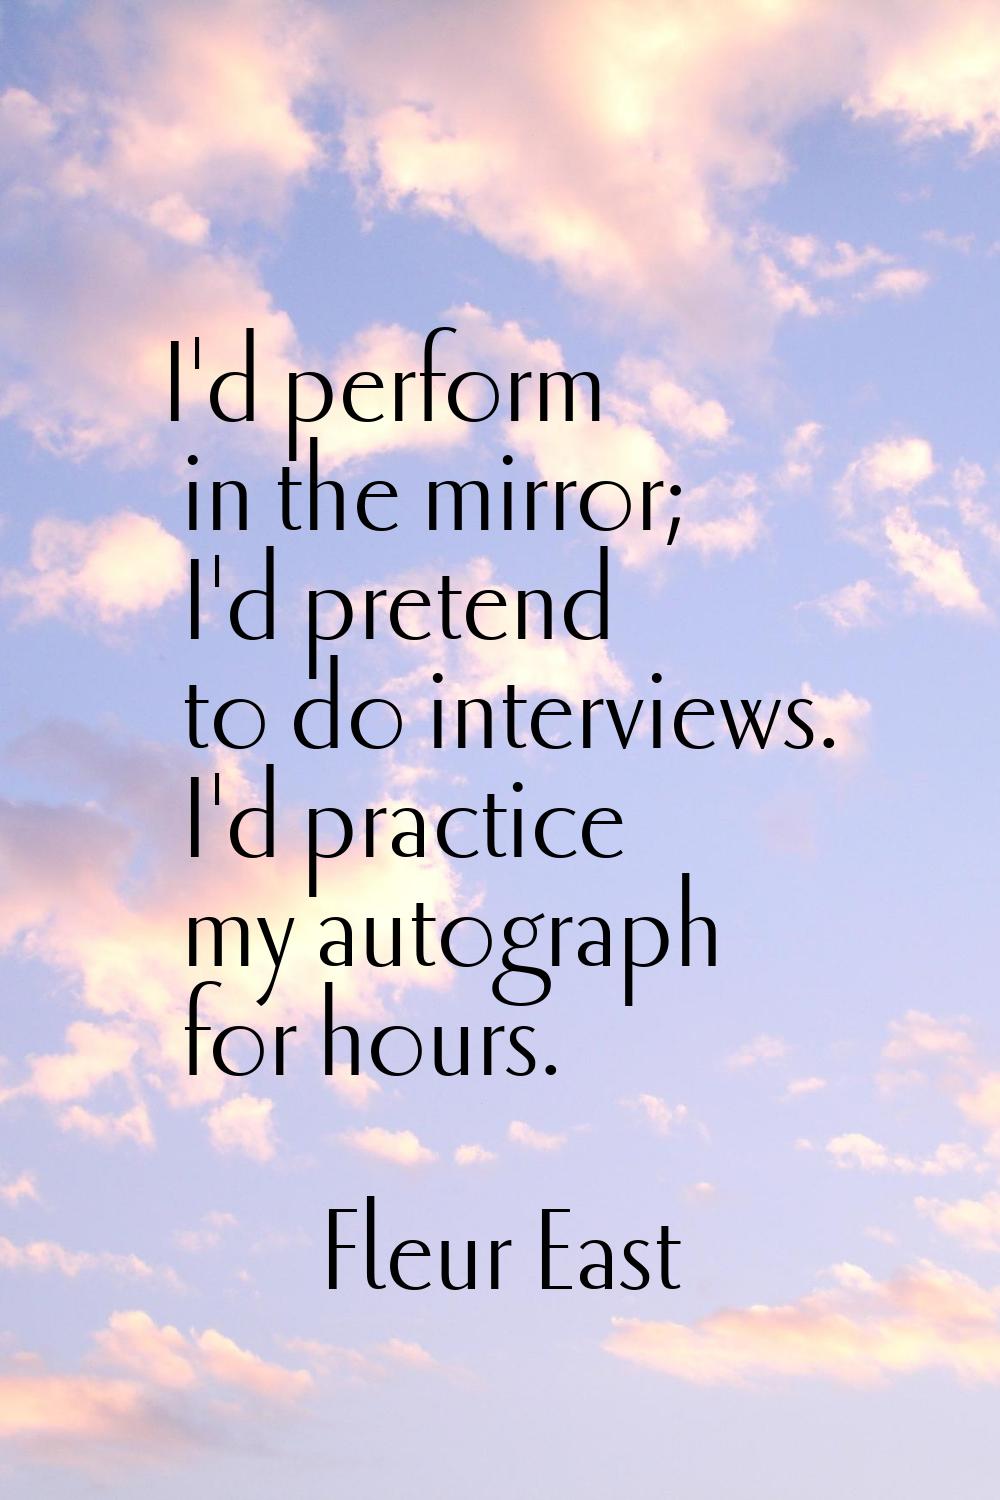 I'd perform in the mirror; I'd pretend to do interviews. I'd practice my autograph for hours.